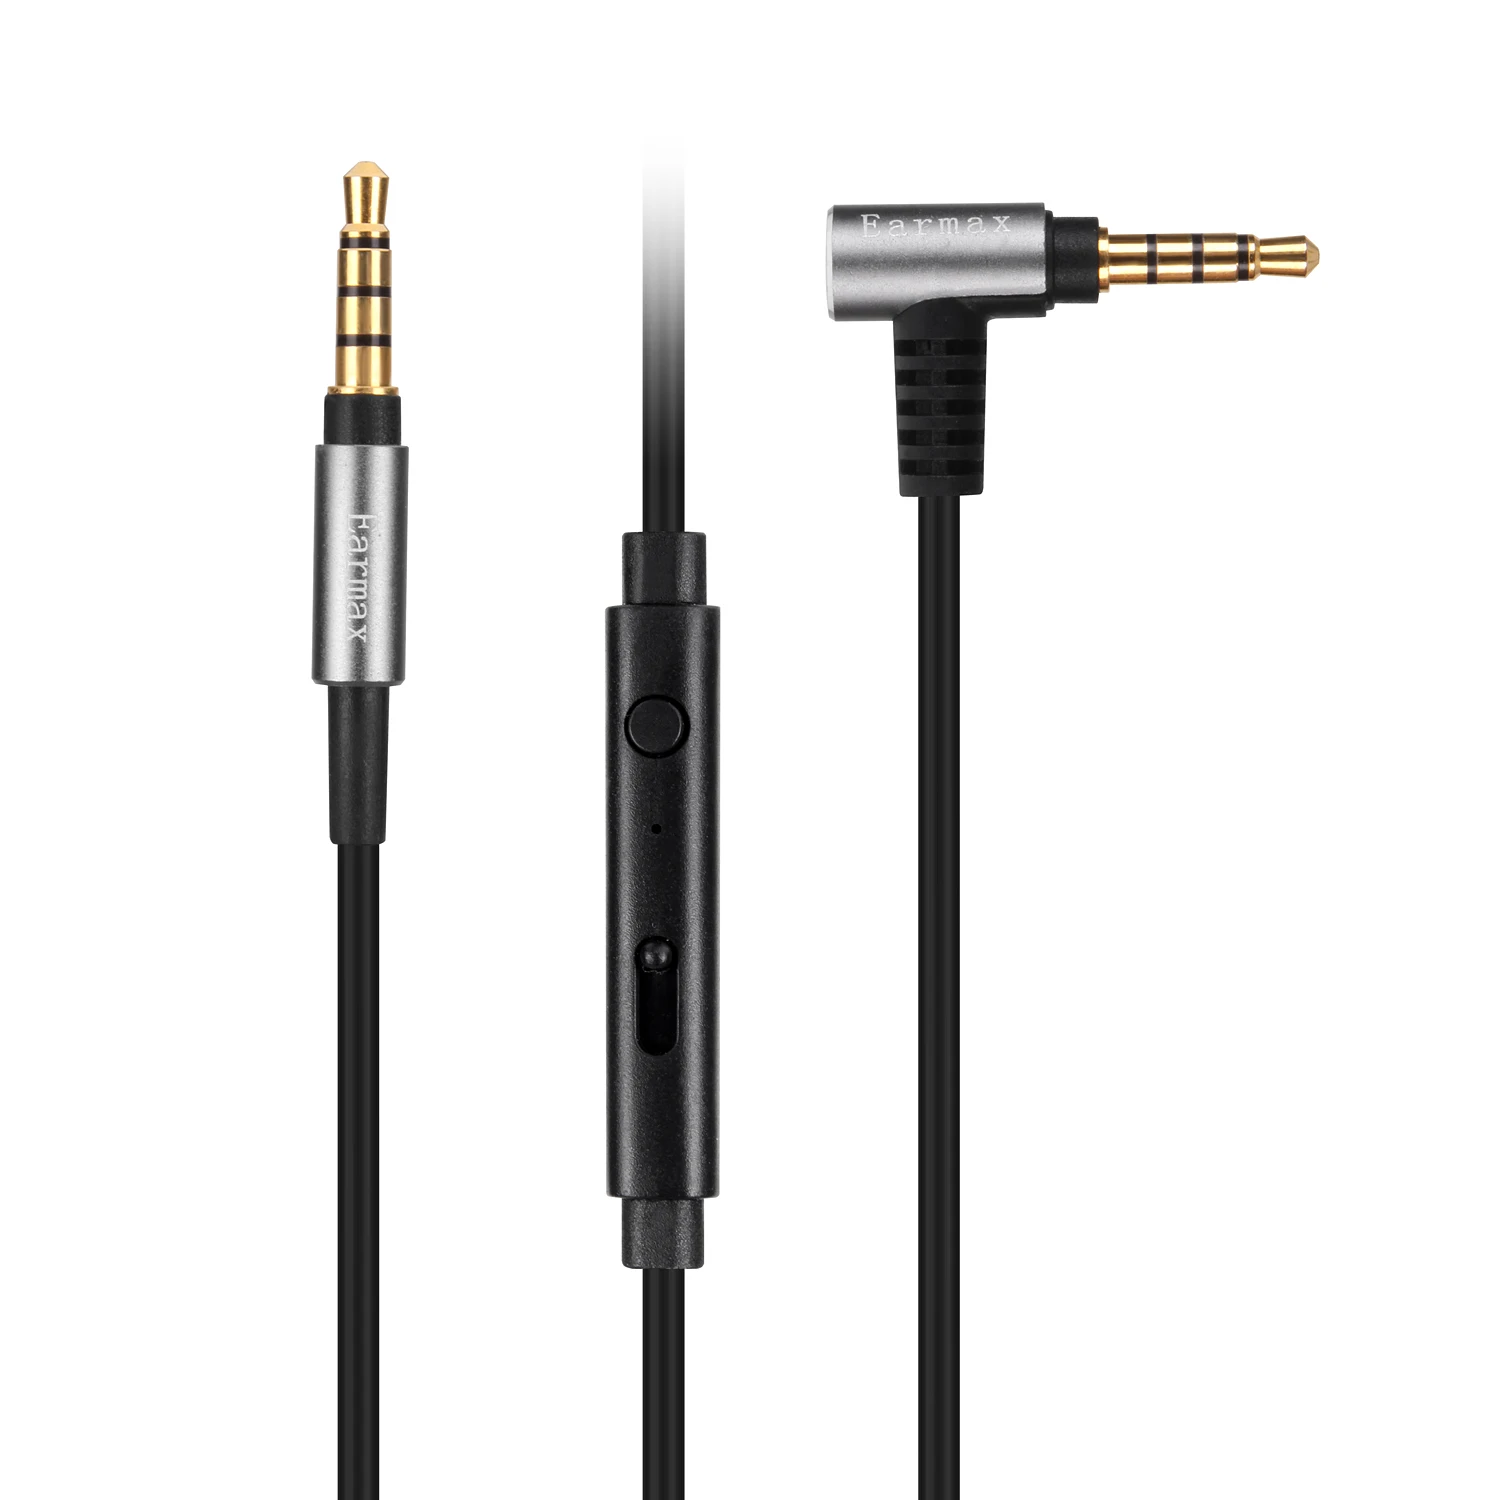 

Black OCC Audio Cable With Mic For Audio technica ATH-WS99BT WS660BT WS990BT WS1100iS ANC500BT S700BT ATH-OX5 headphones